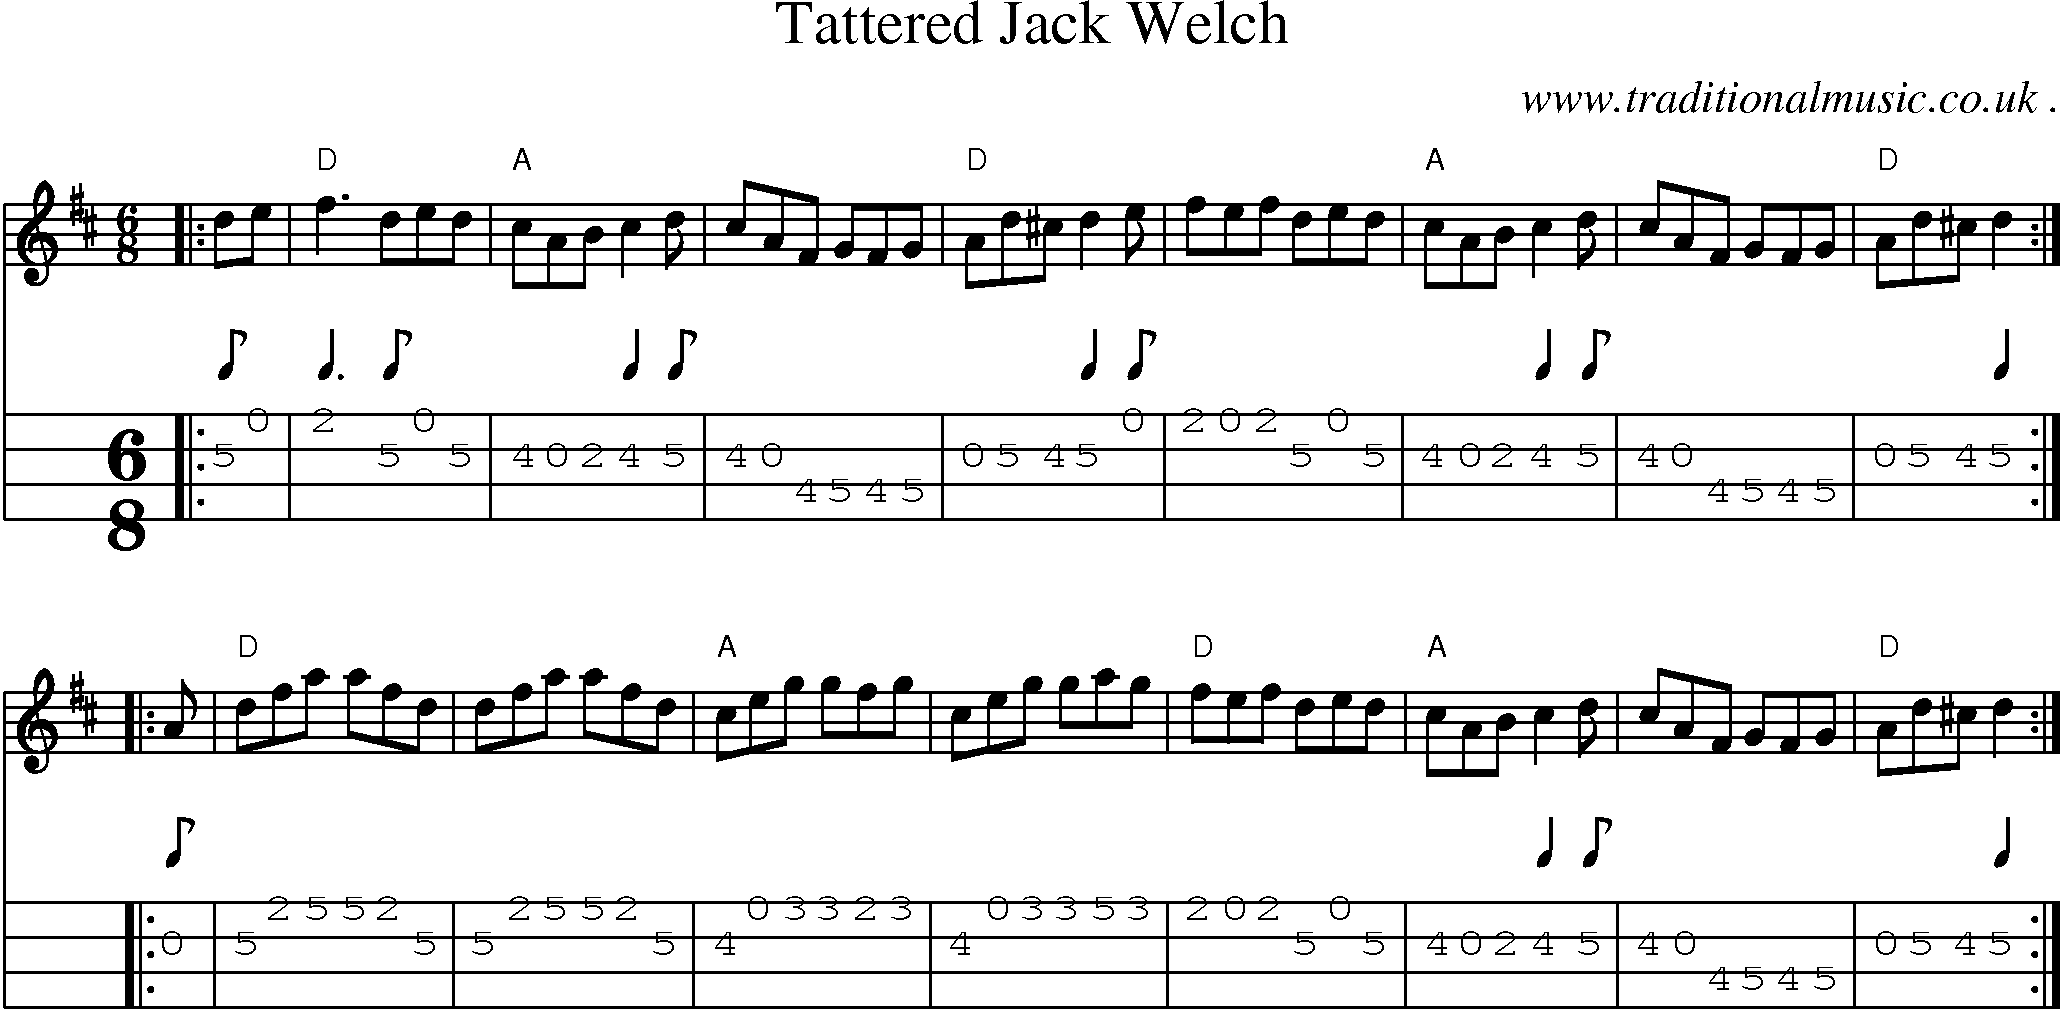 Music Score and Guitar Tabs for Tattered Jack Welch